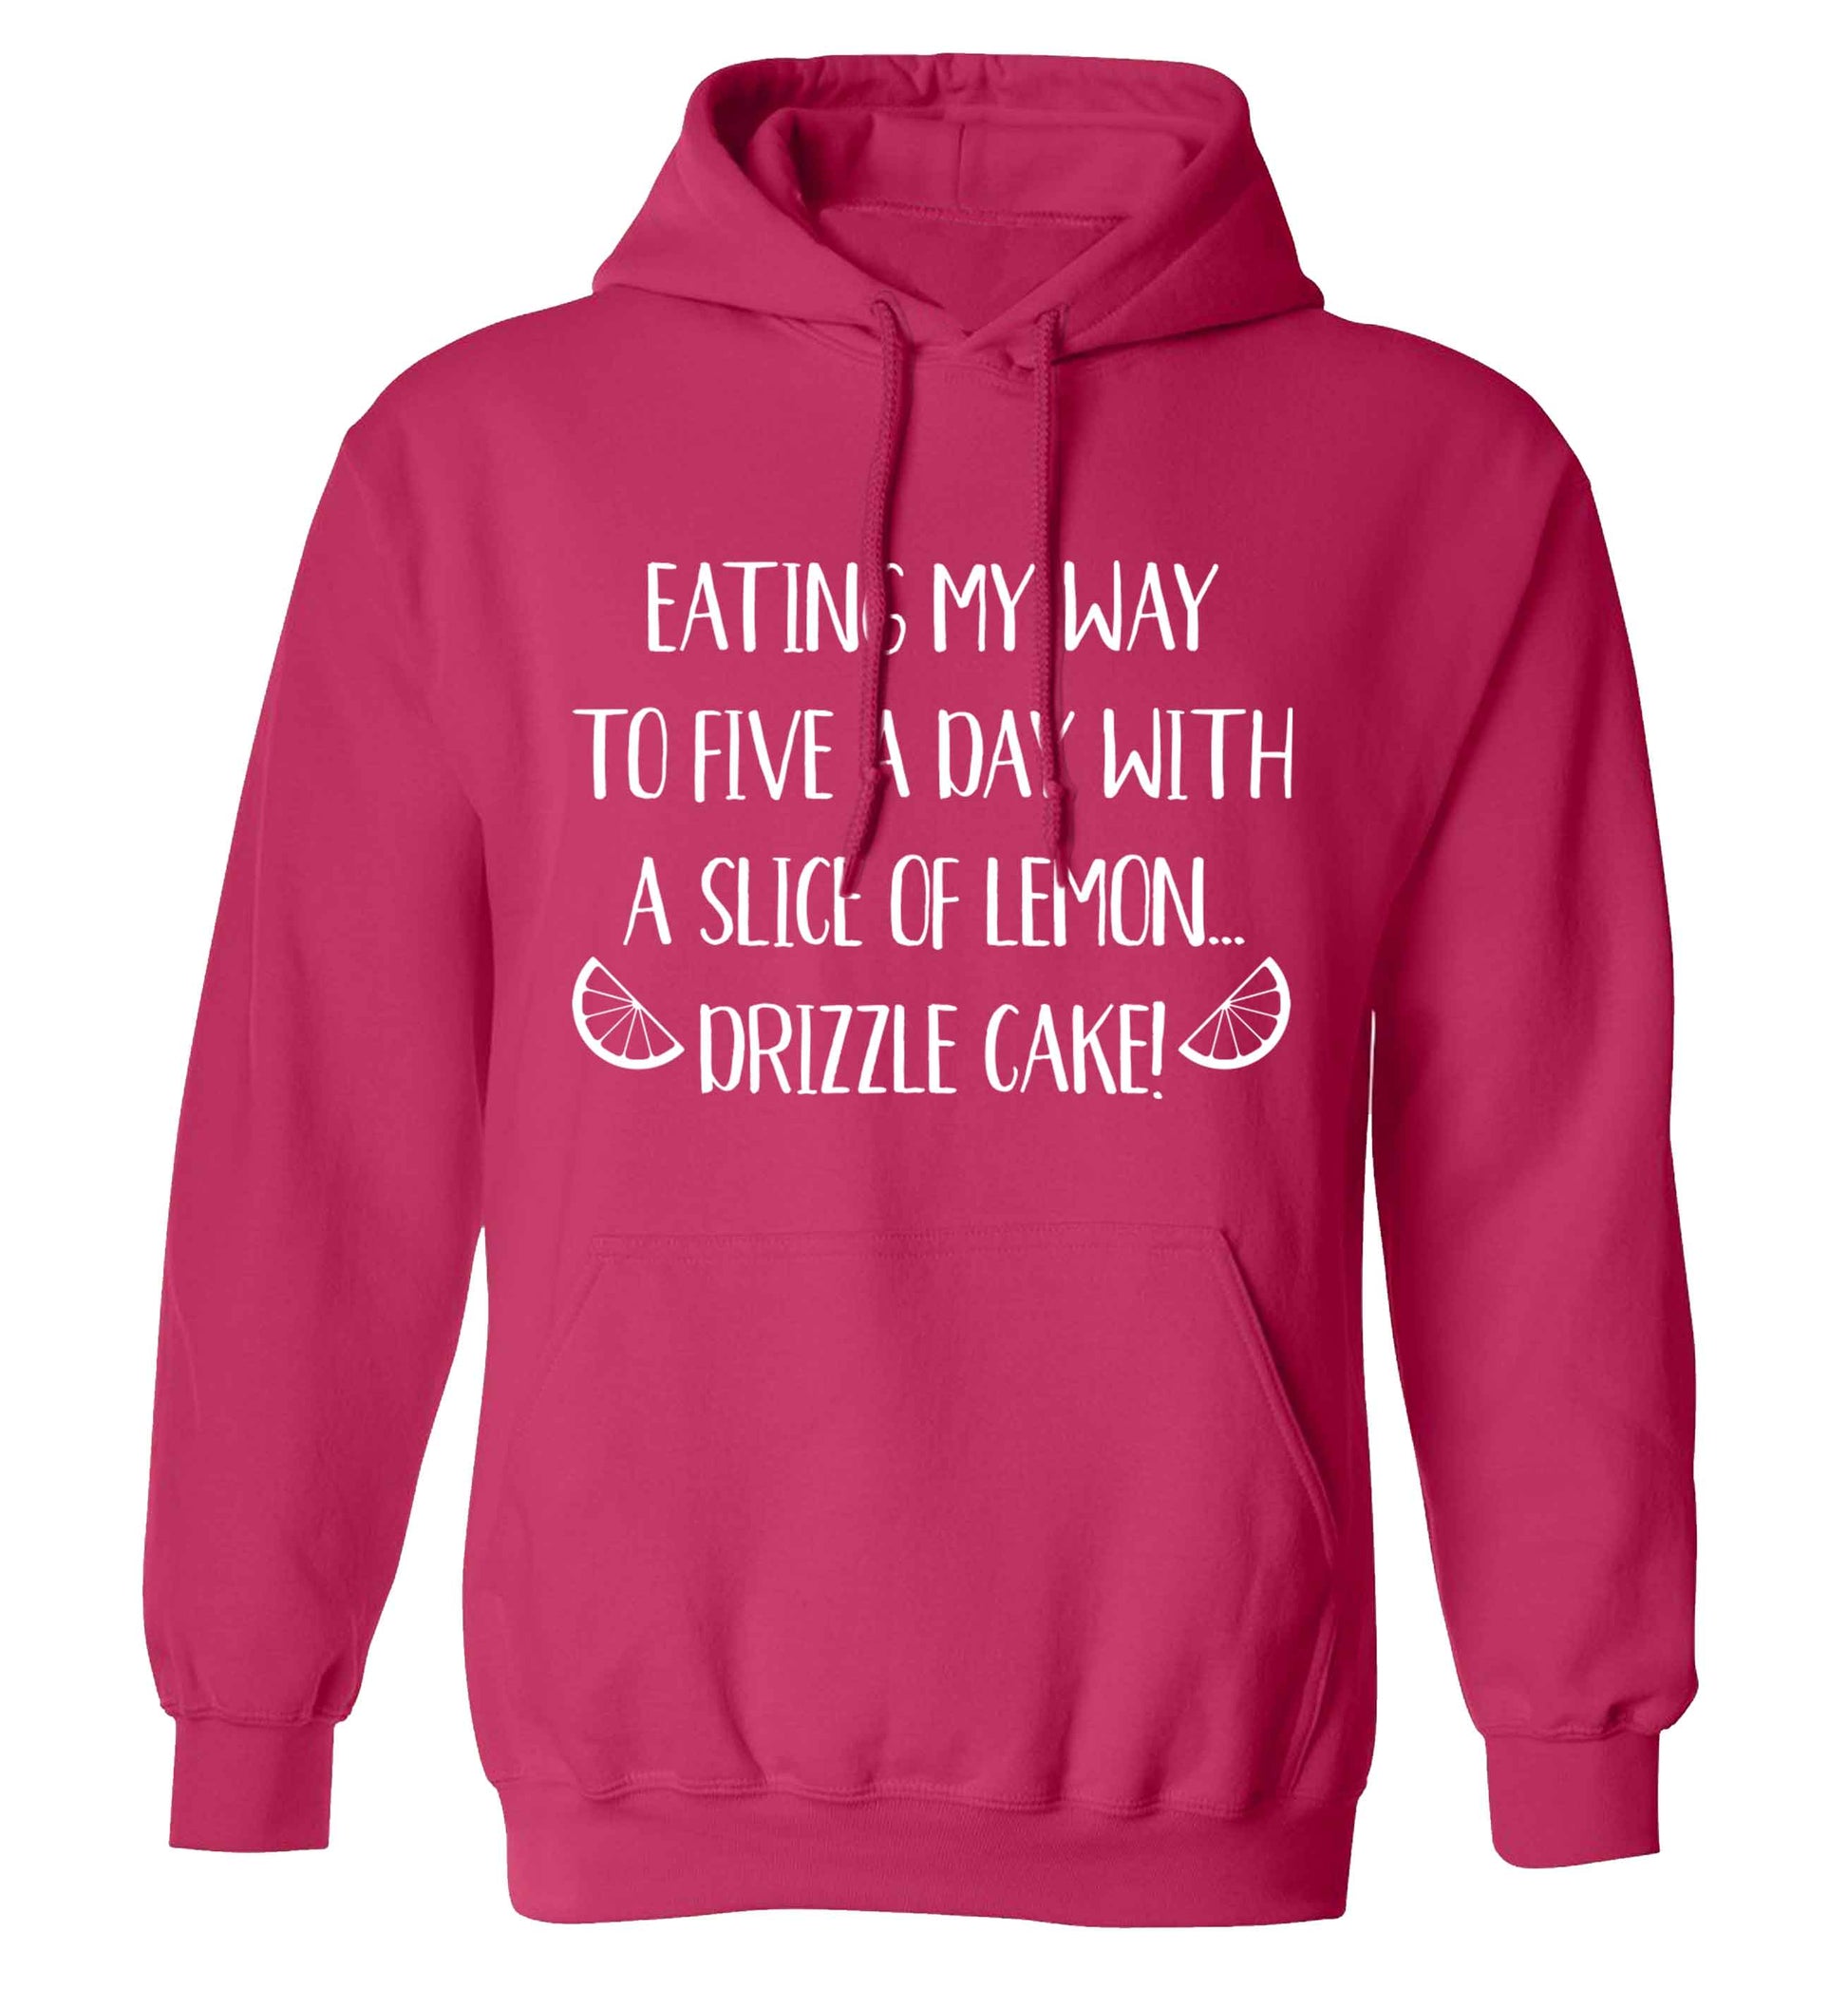 Eating my way to five a day with a slice of lemon drizzle cake day adults unisex pink hoodie 2XL